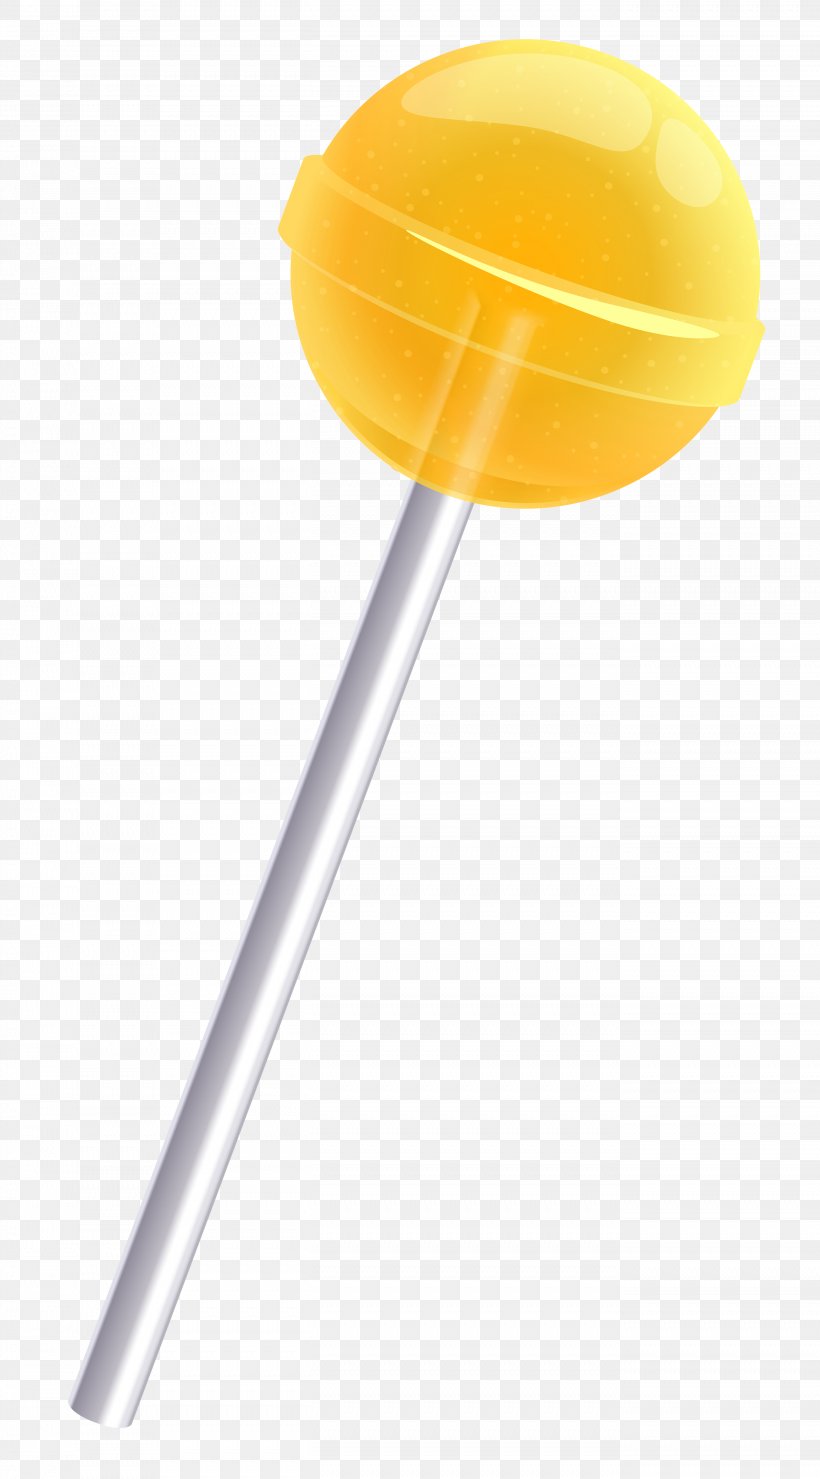 Spoon Yellow Design Product, PNG, 2706x4882px, Cutlery, Lollipop, Product Design, Spoon, Yellow Download Free